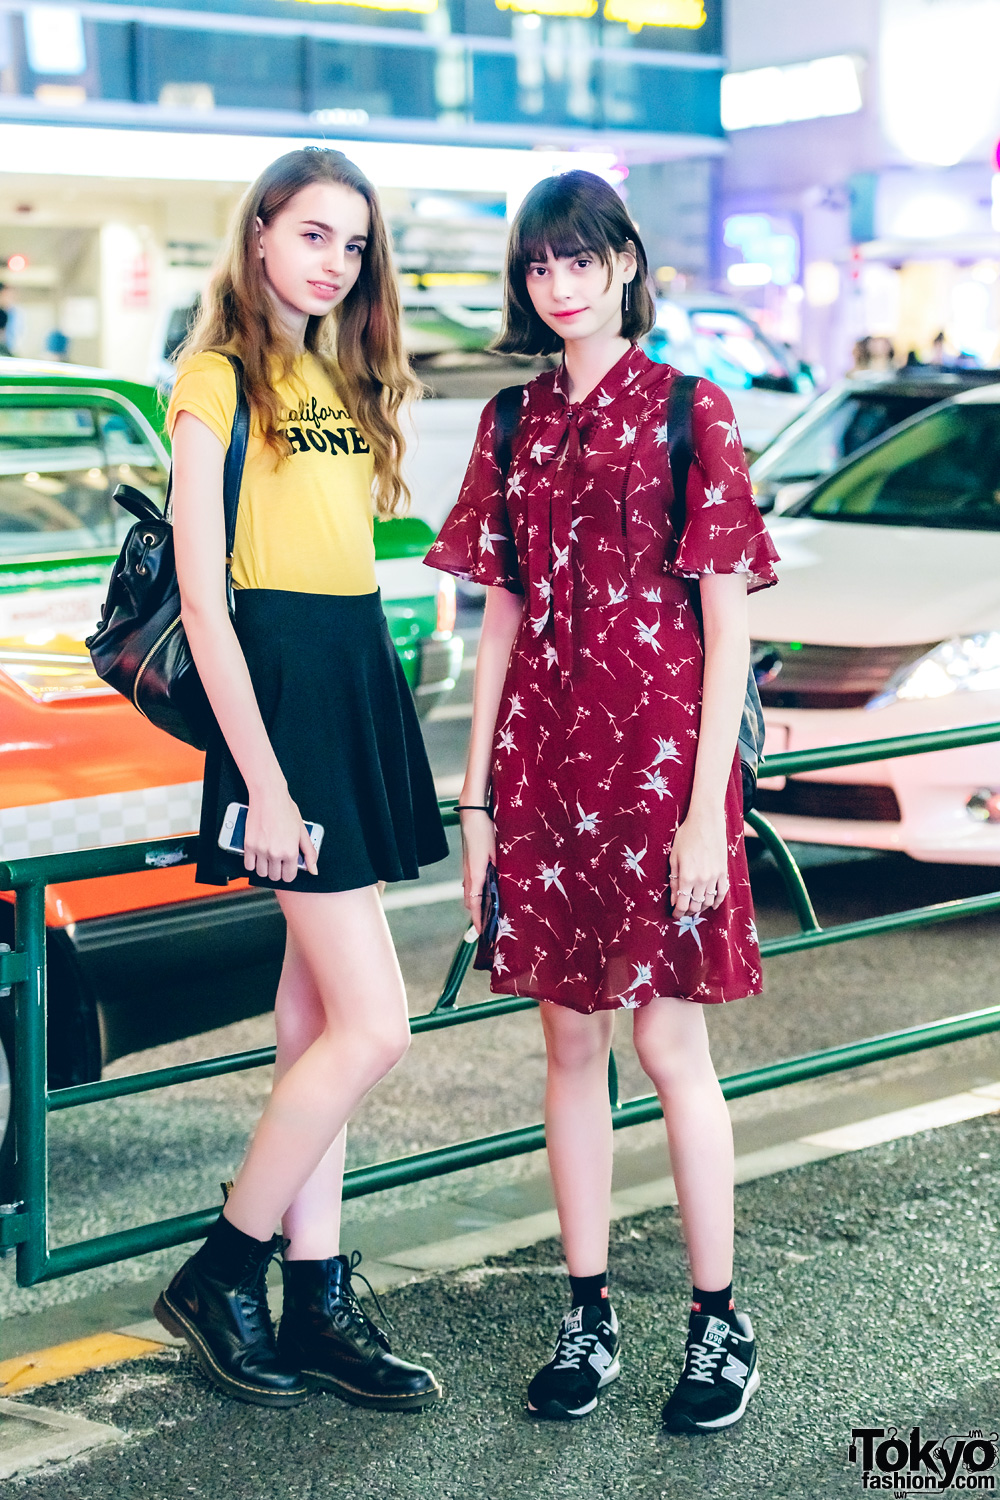 Harajuku Models in Casual Street Styles w/ Dr. Martens Boots, New Balance Sneakers & Louis ...